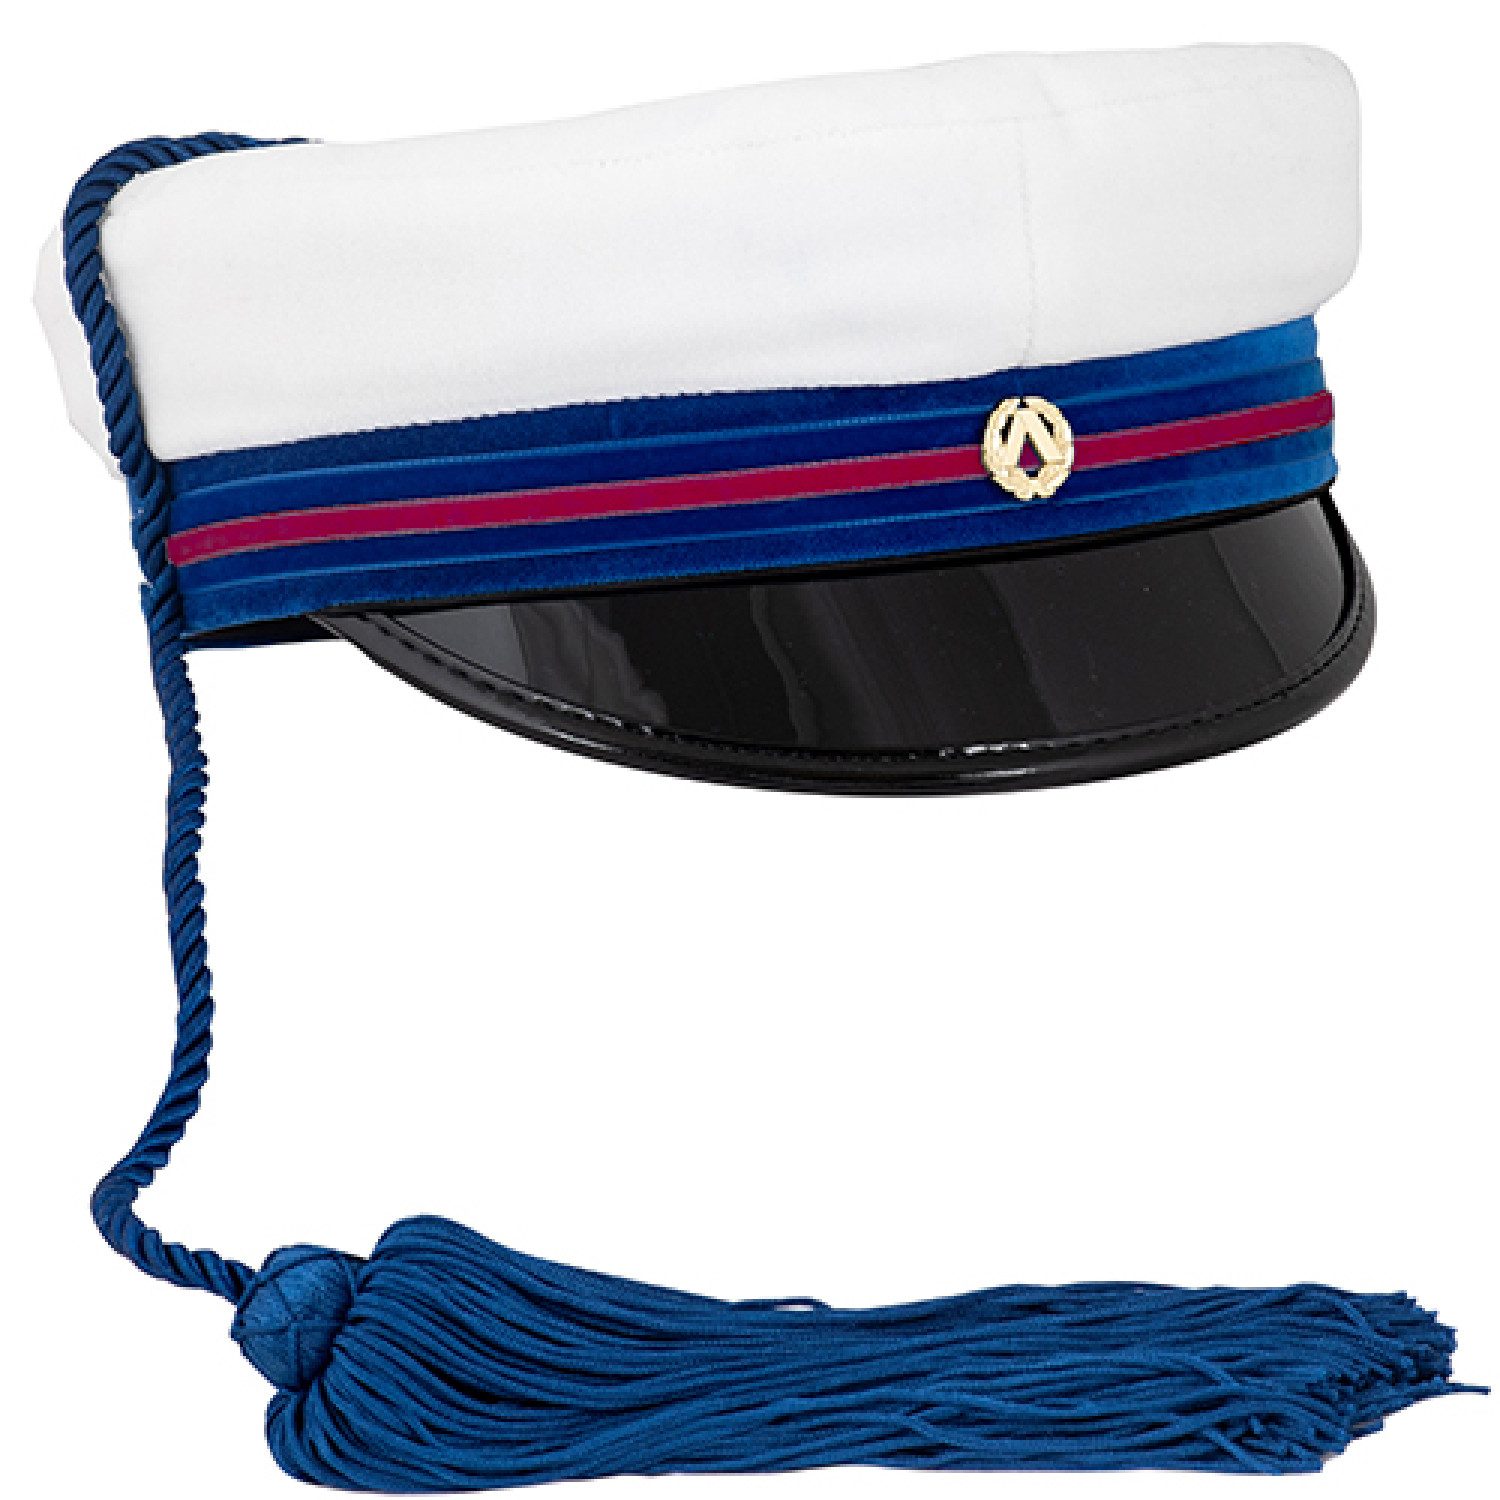 Security Officer's Cap (SQ)